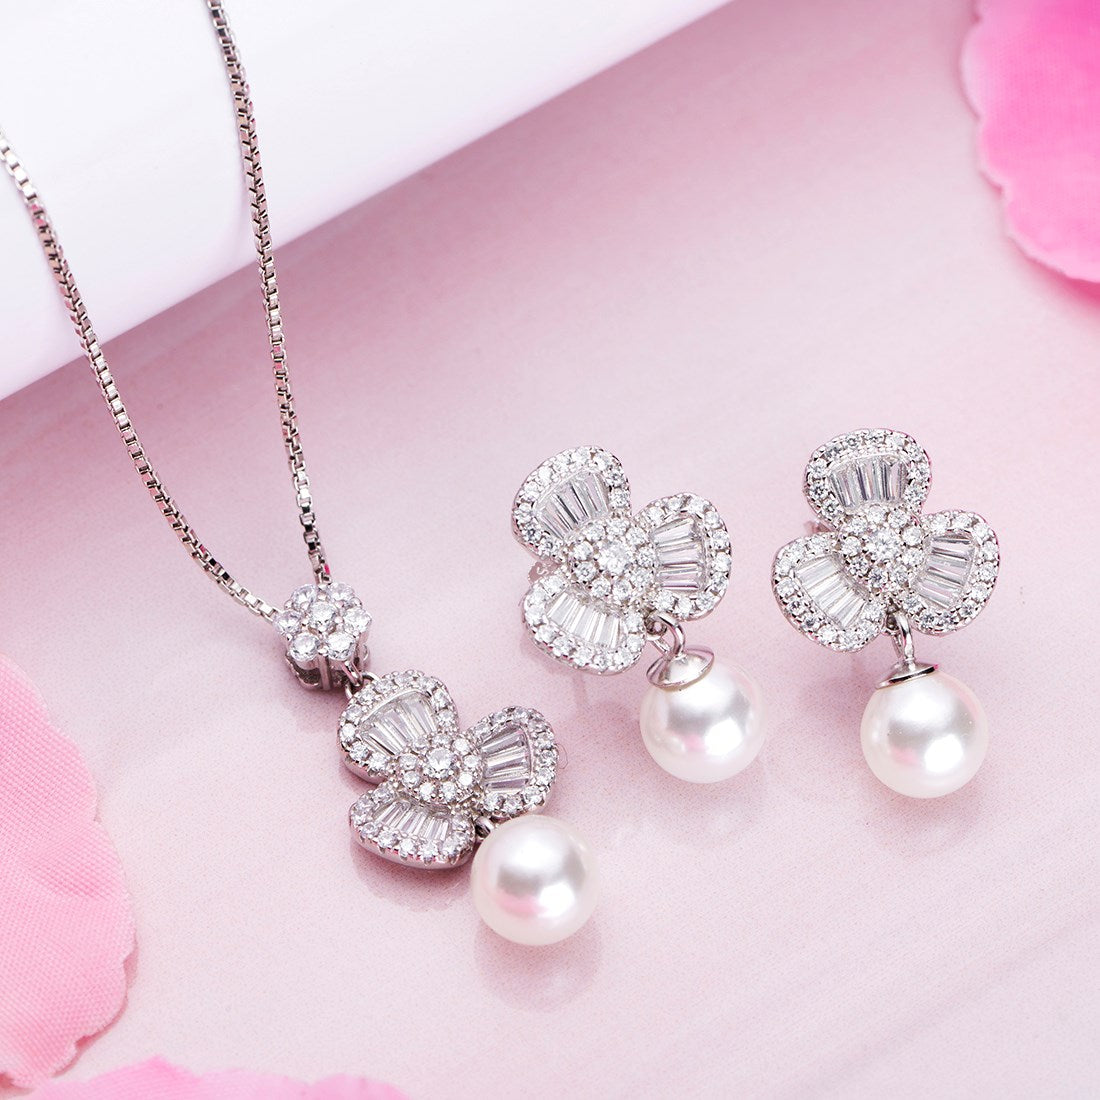 Graceful Bloom Rhodium Plated 925 Sterling Silver Jewelry Set